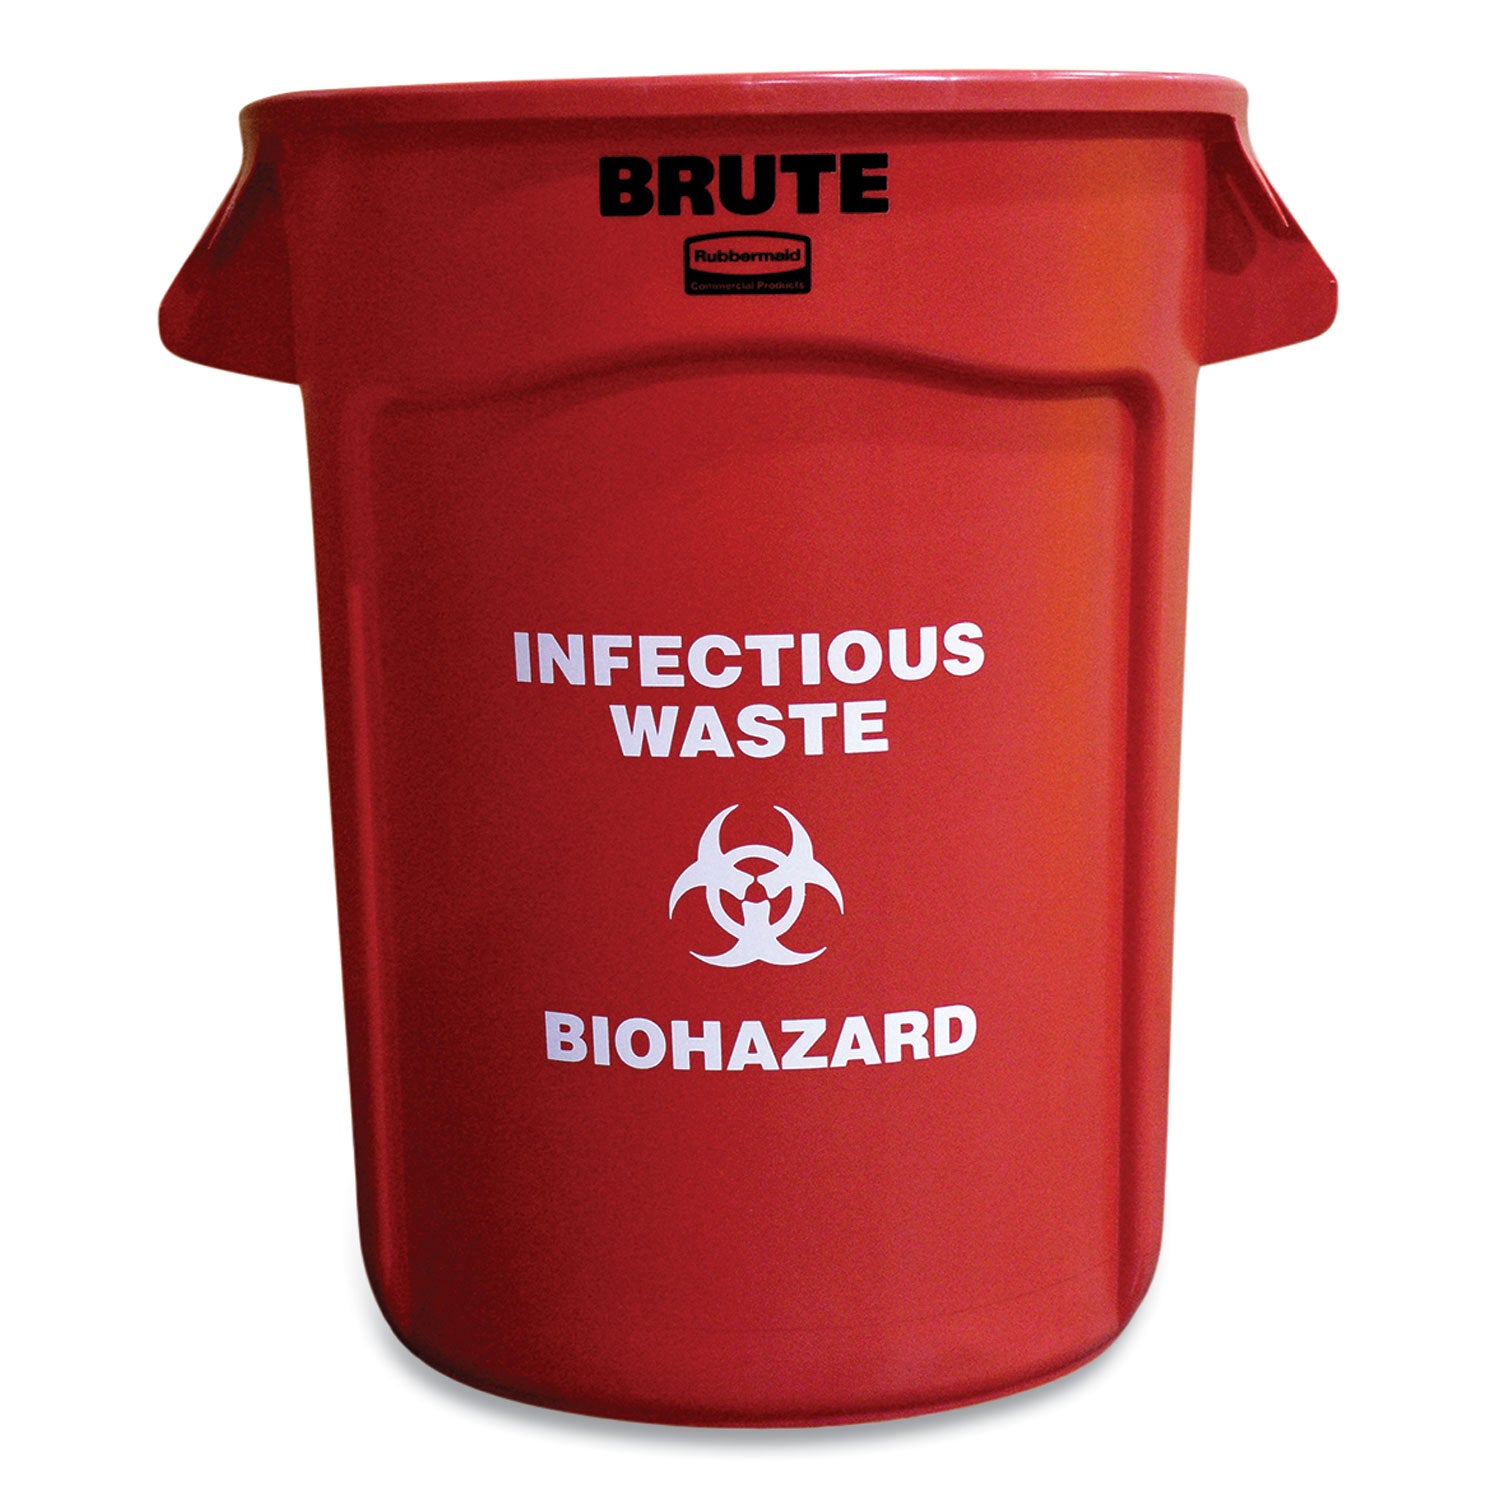 vented-round-brute-container-infectious-waste-biohazard-imprint-32-gal-plastic-red_rcp263294red - 1